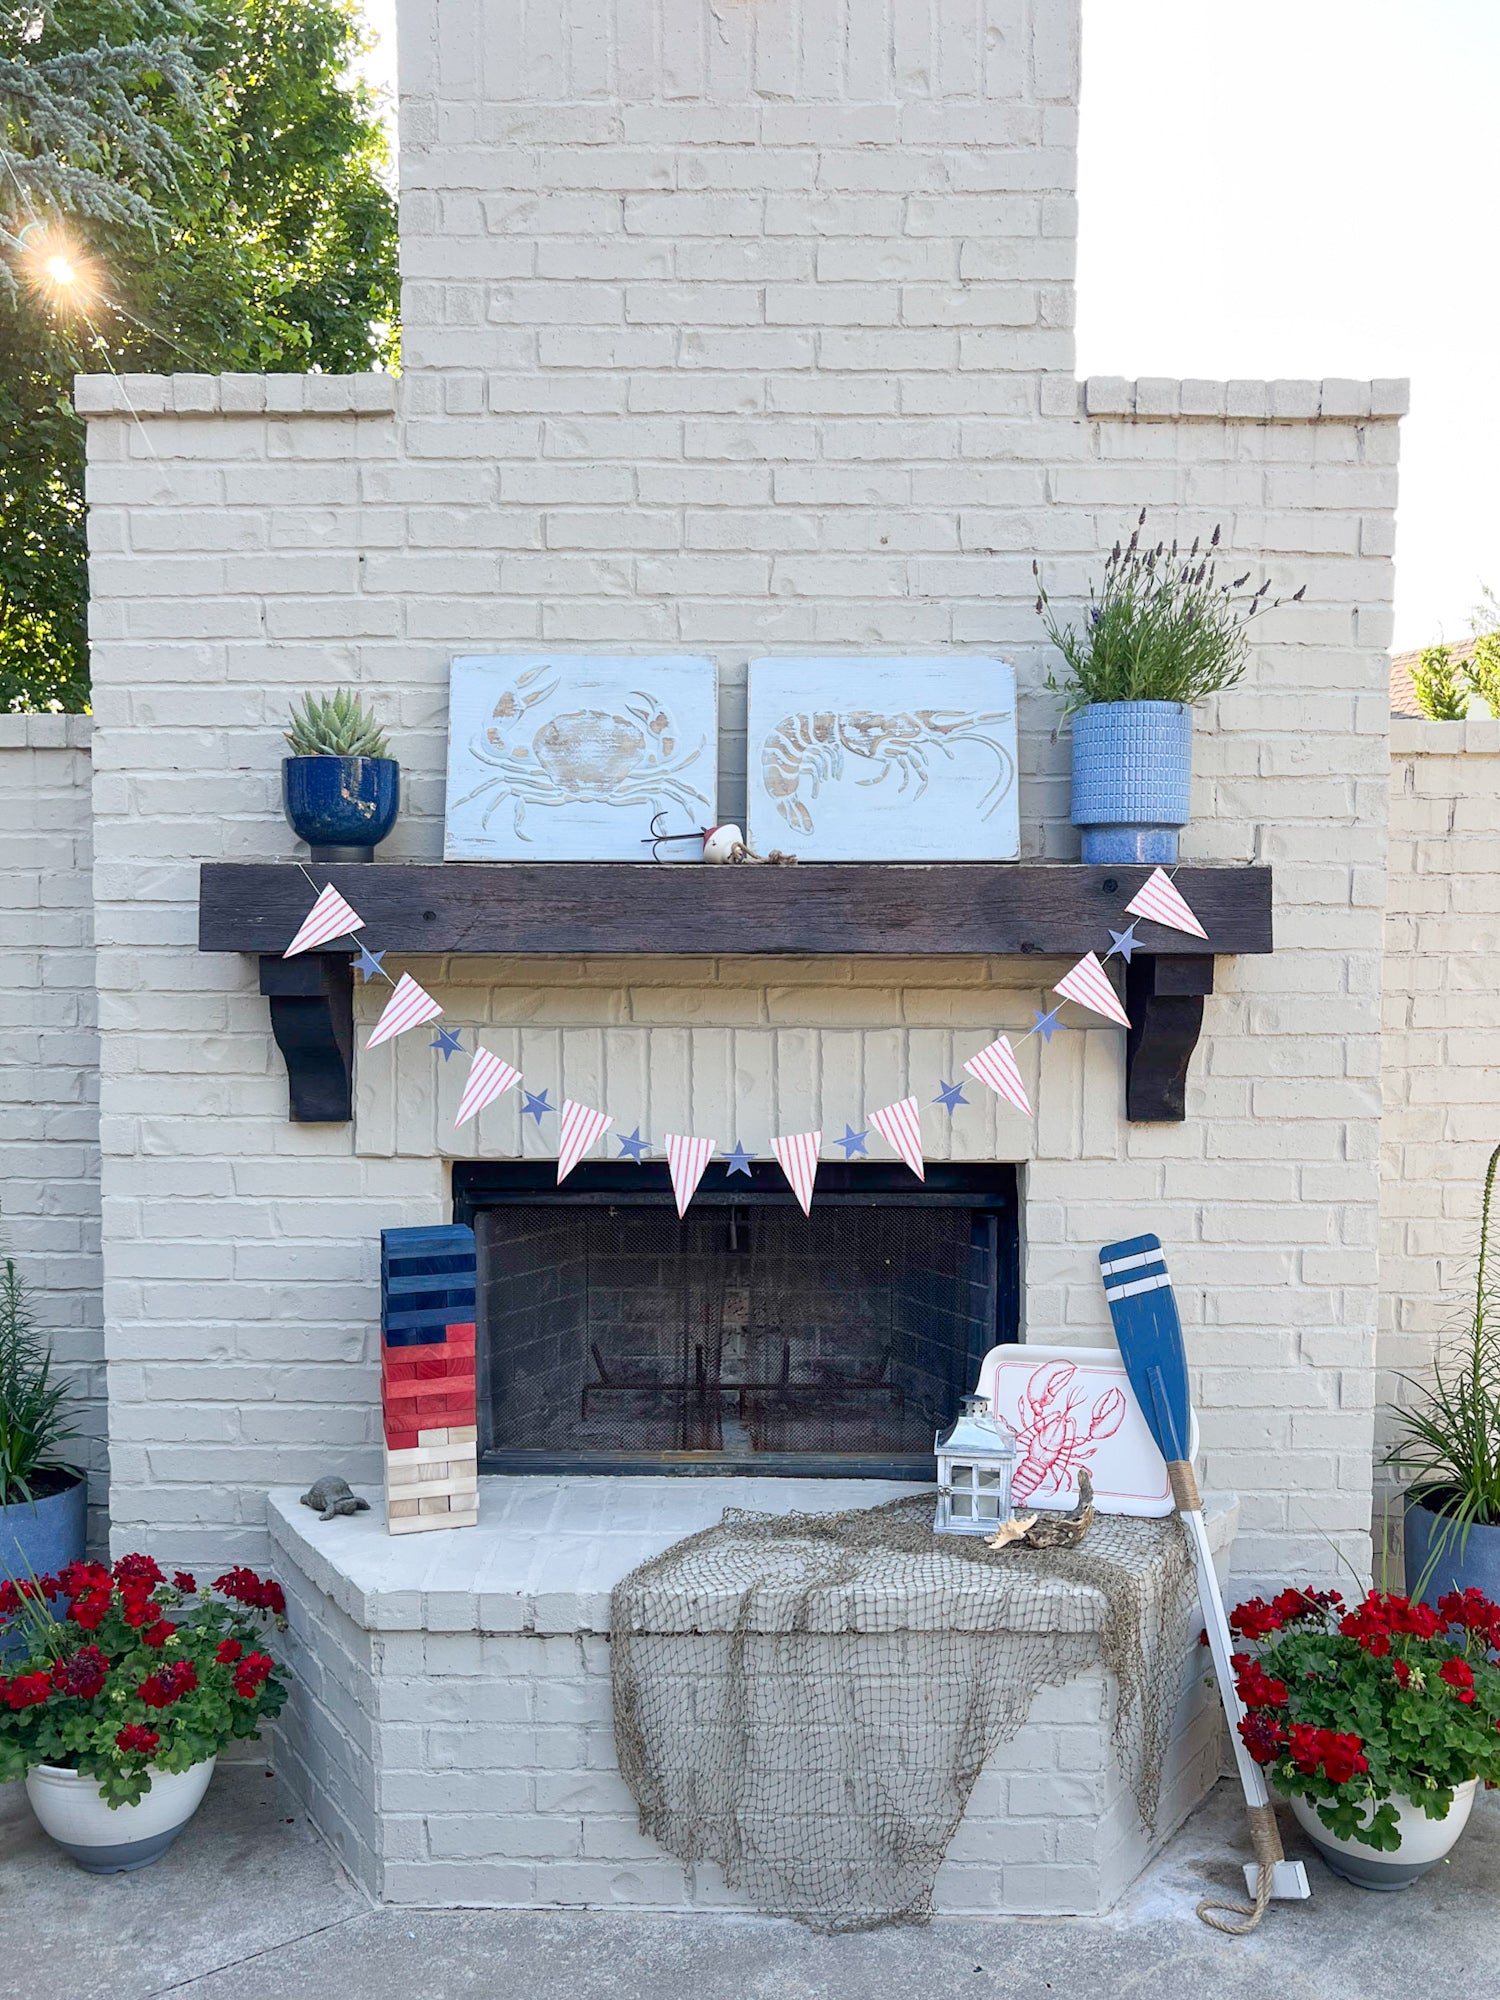 Patriotic Lobster Bake Decorations | The Party Darling